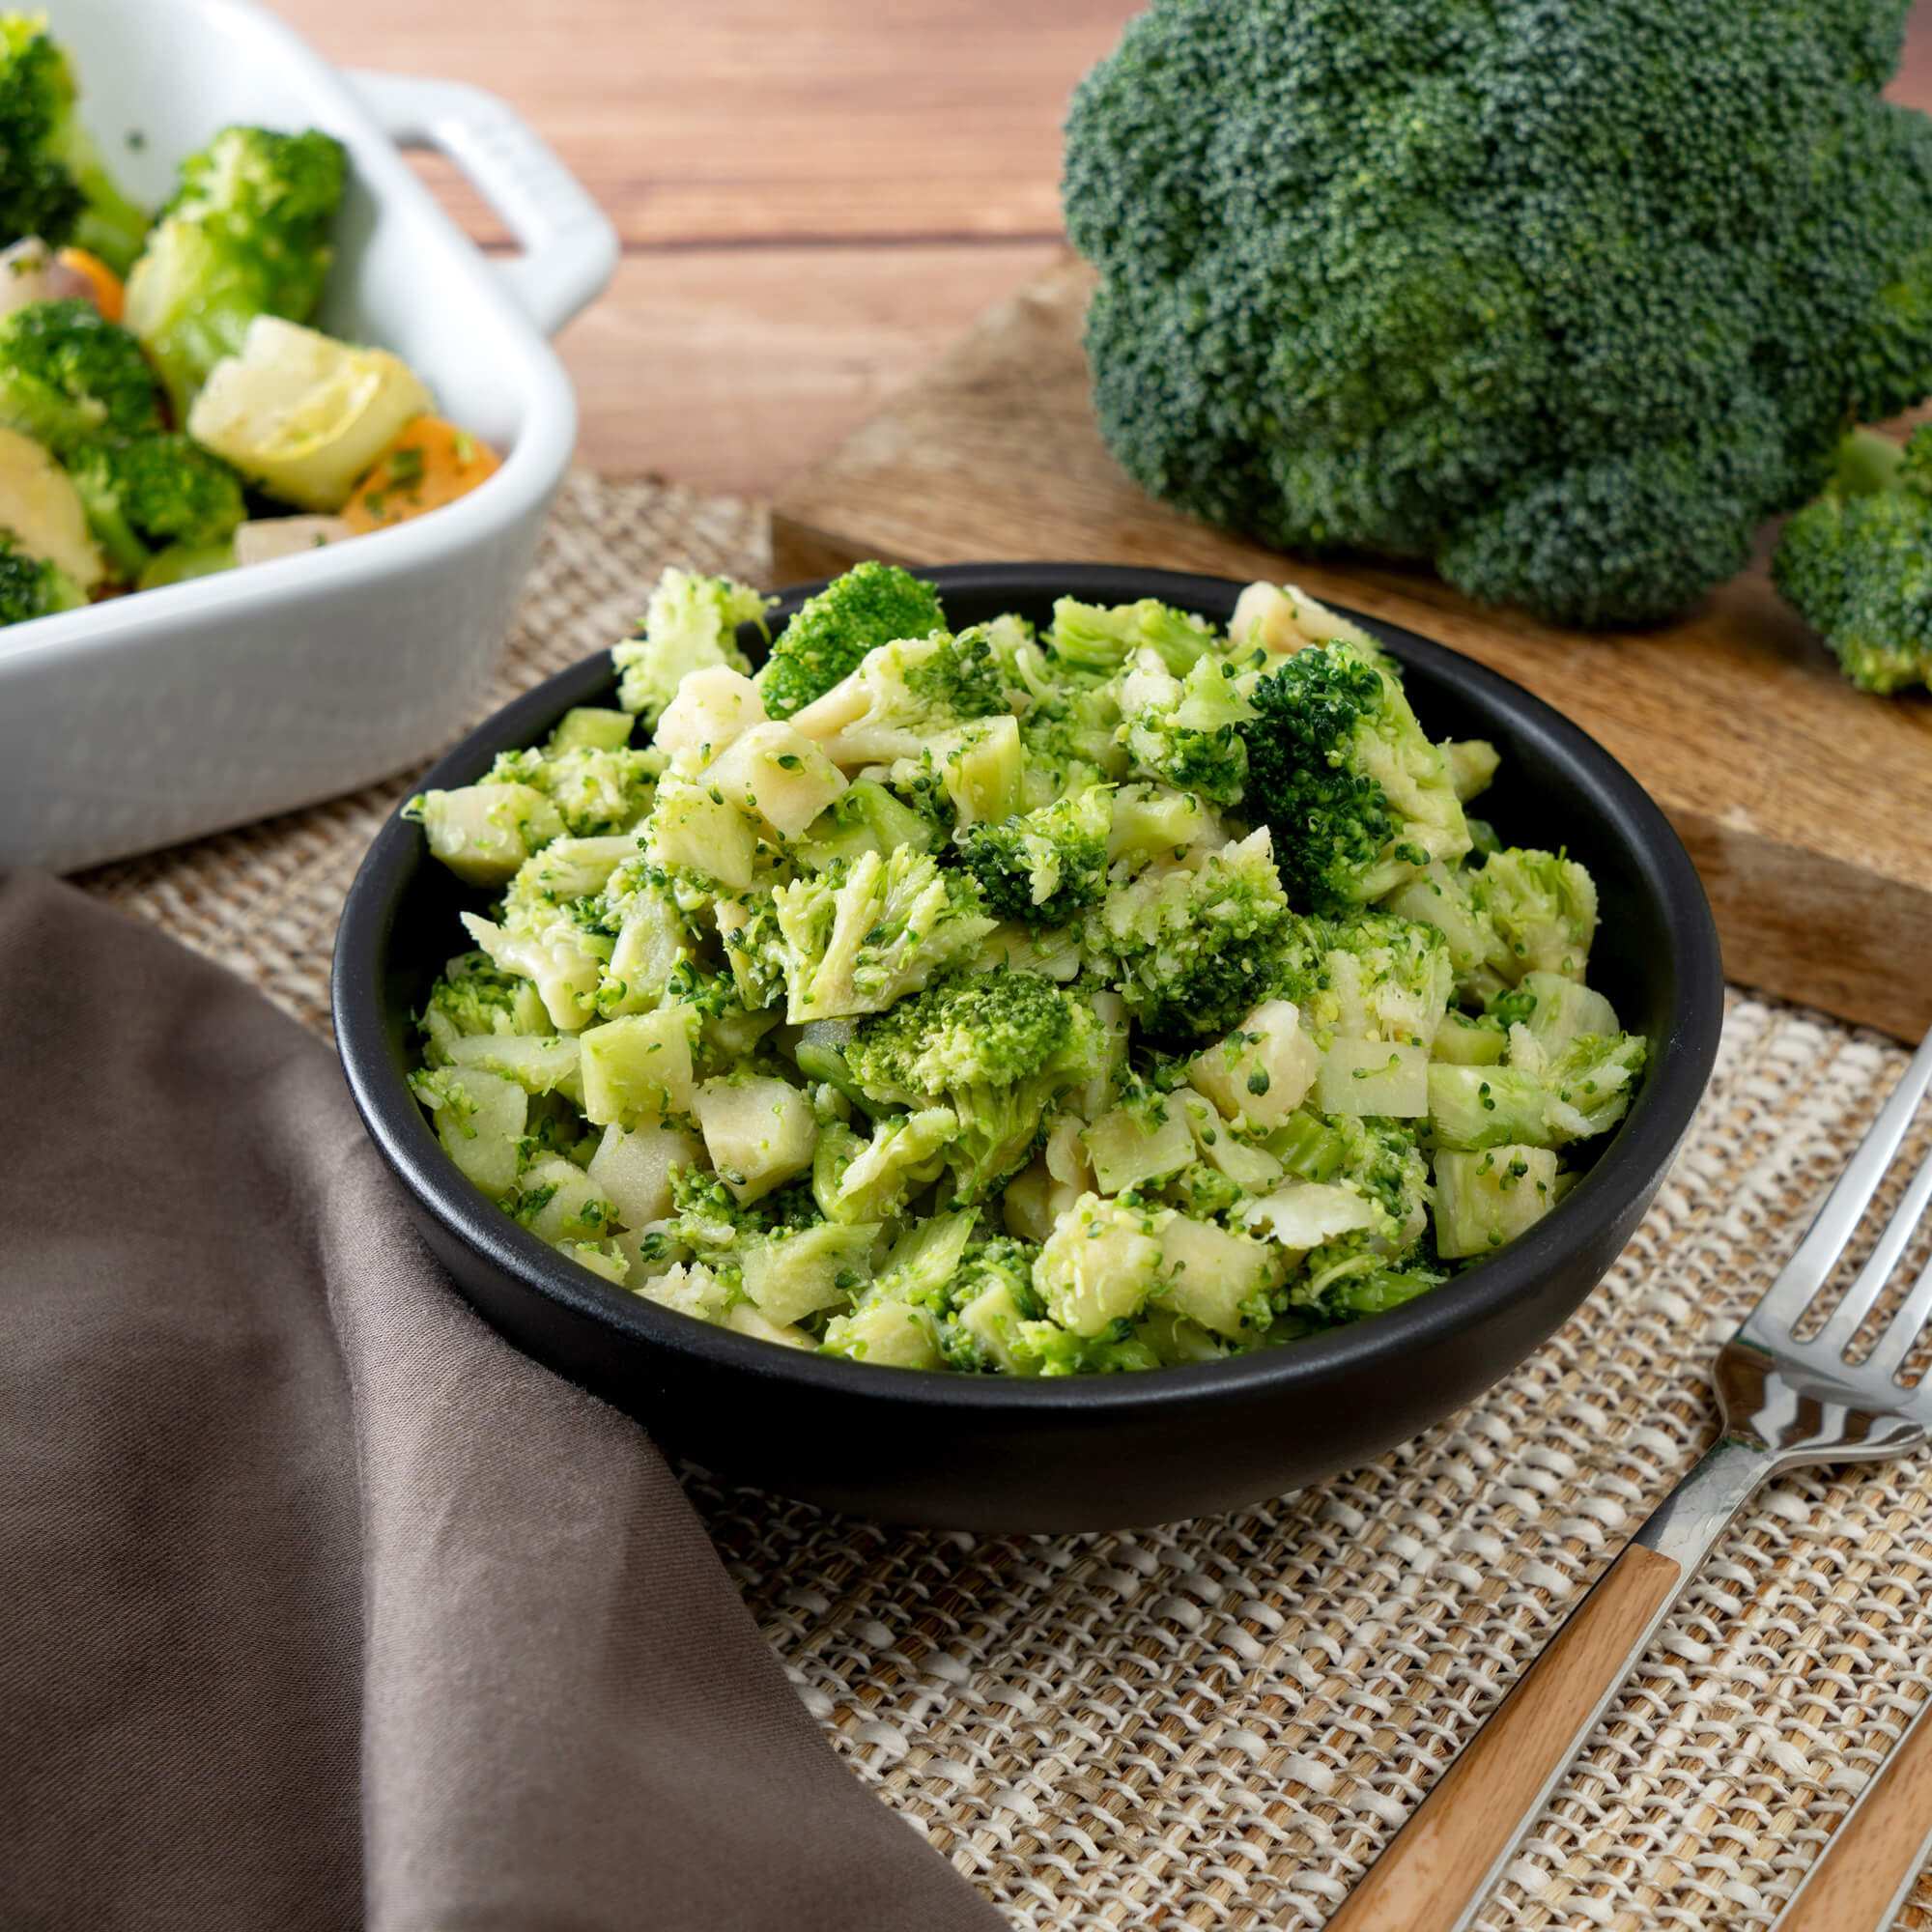 Freeze-Dried Buttered Broccoli - 12 Serving #10 Can